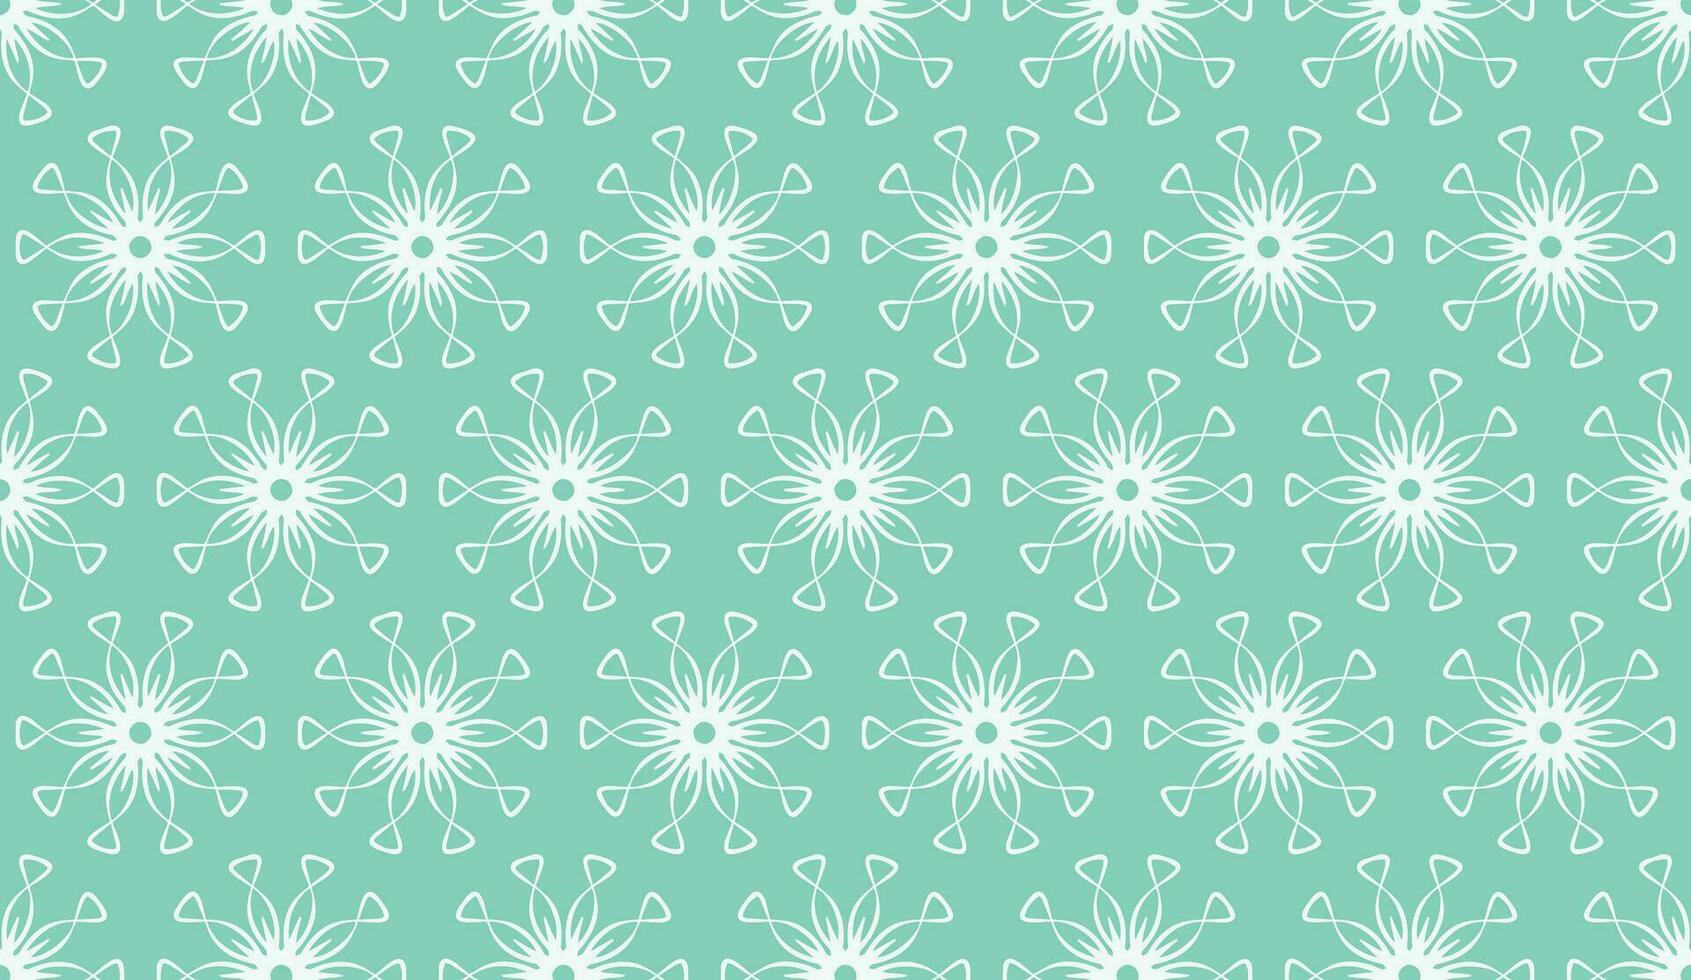 abstract luxury elegant white and turquoise blue floral seamless pattern vector